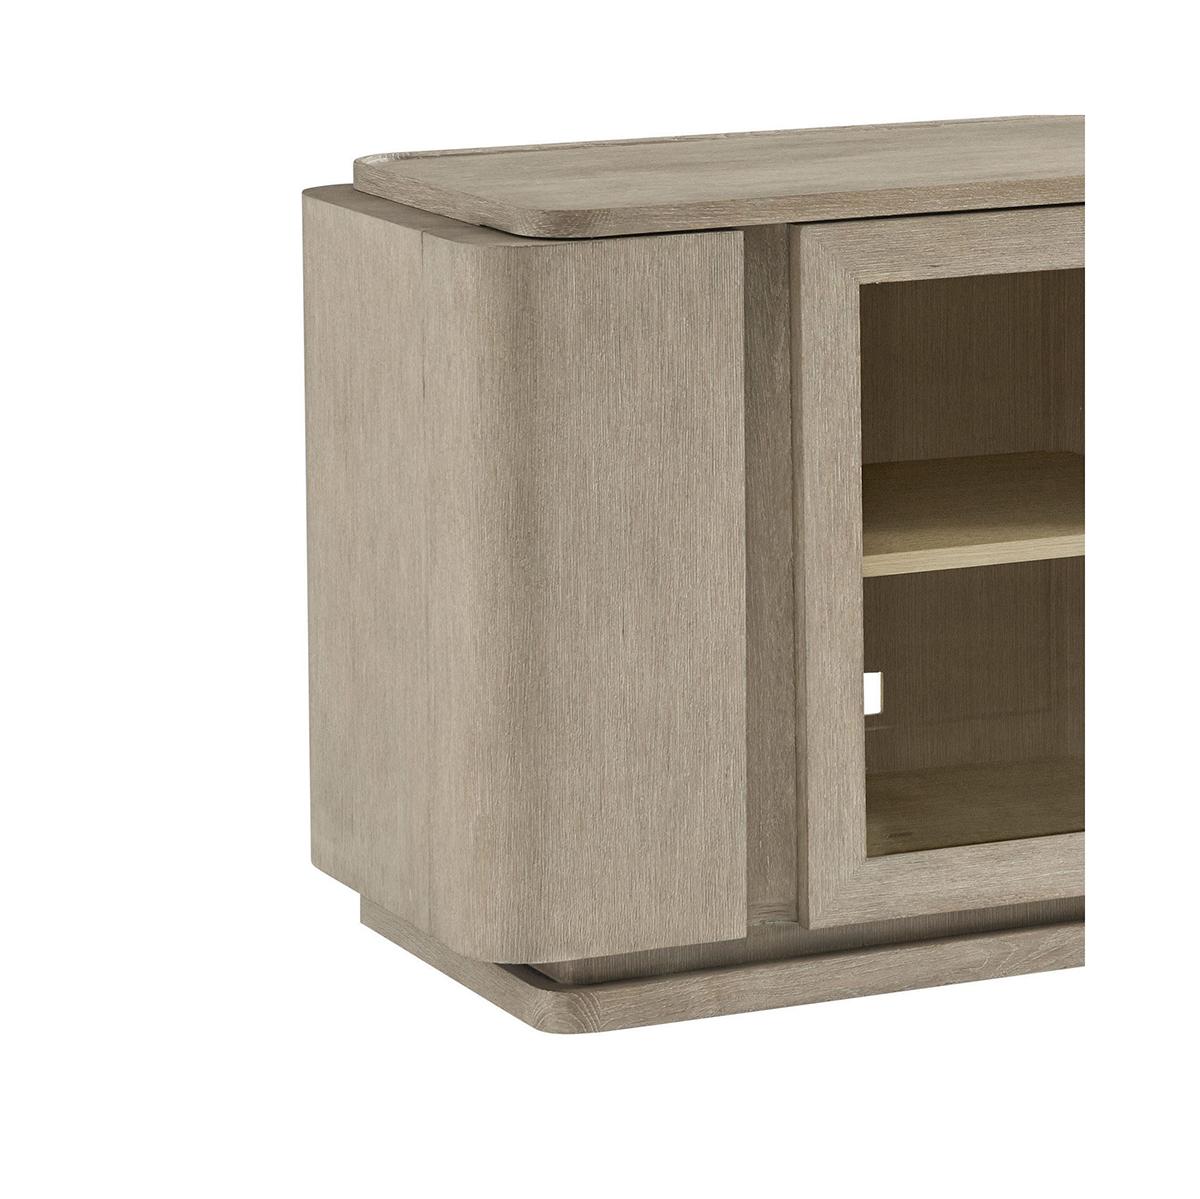 With an amazing amount of storage for all your media. Two glass front cabinets with adjustable shelving, cord cutouts and vents at the back.

Hidden on the ends are curved doors that conceal two small shelves to store away small items, and three,